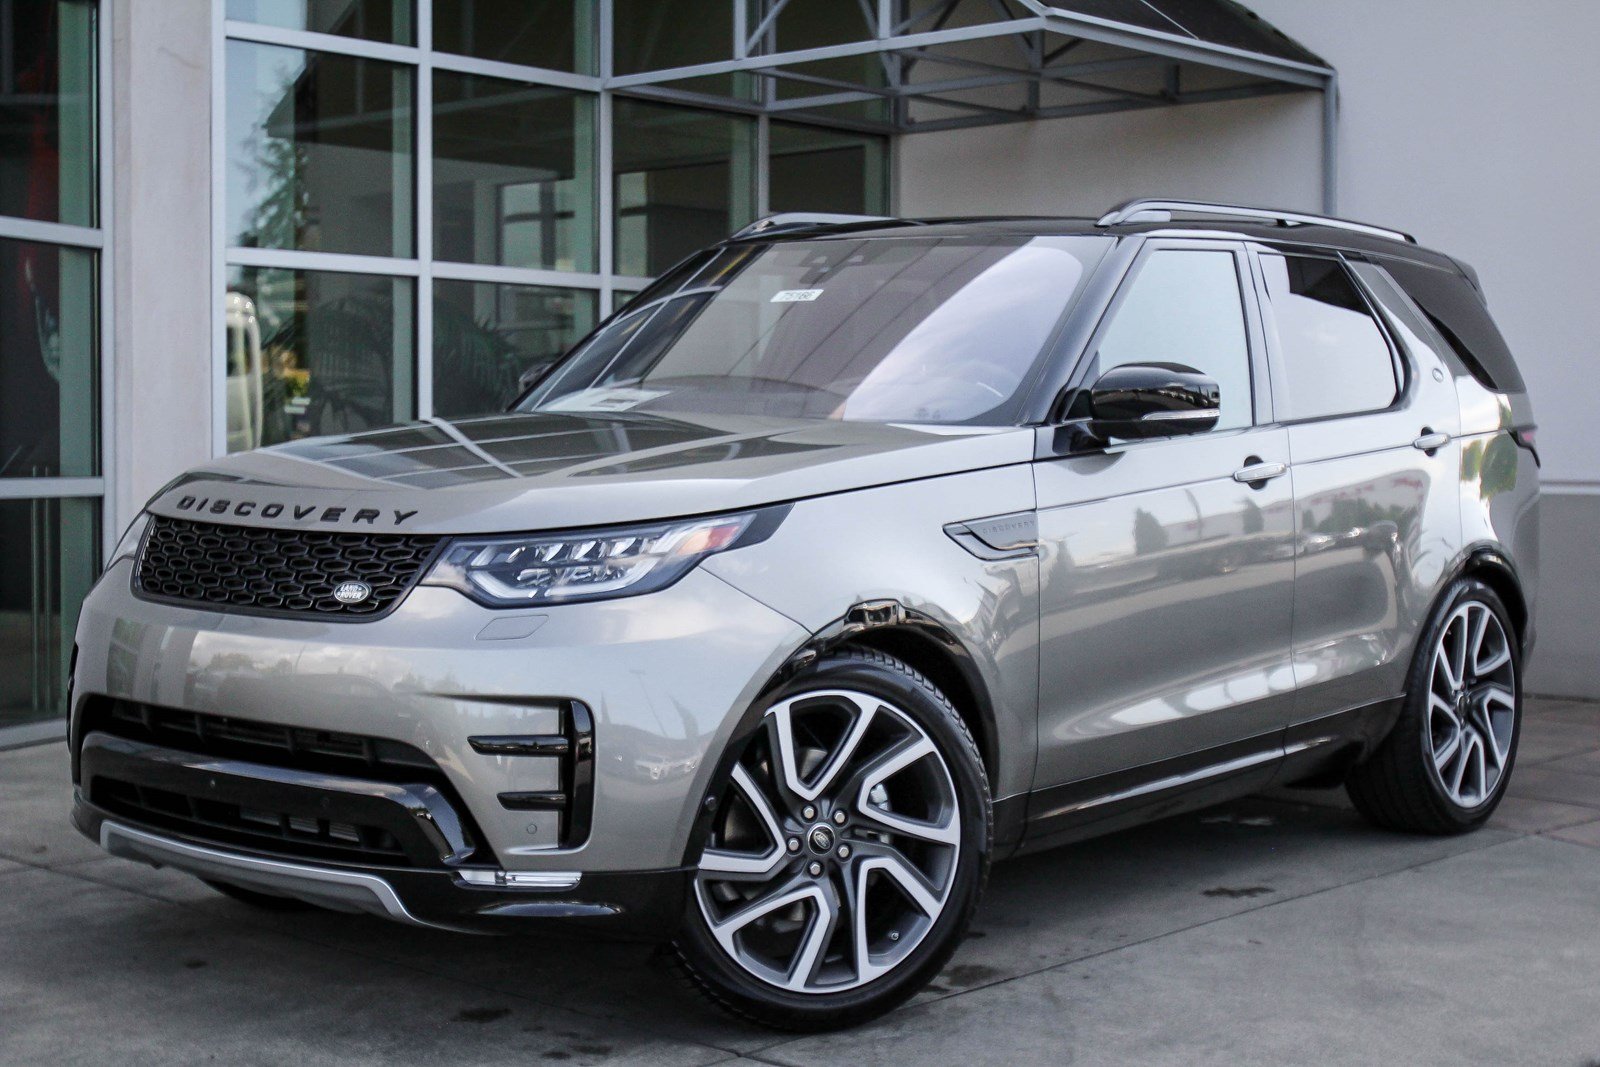 New 2020 Land Rover Discovery HSE Luxury Sport Utility in Bellevue 